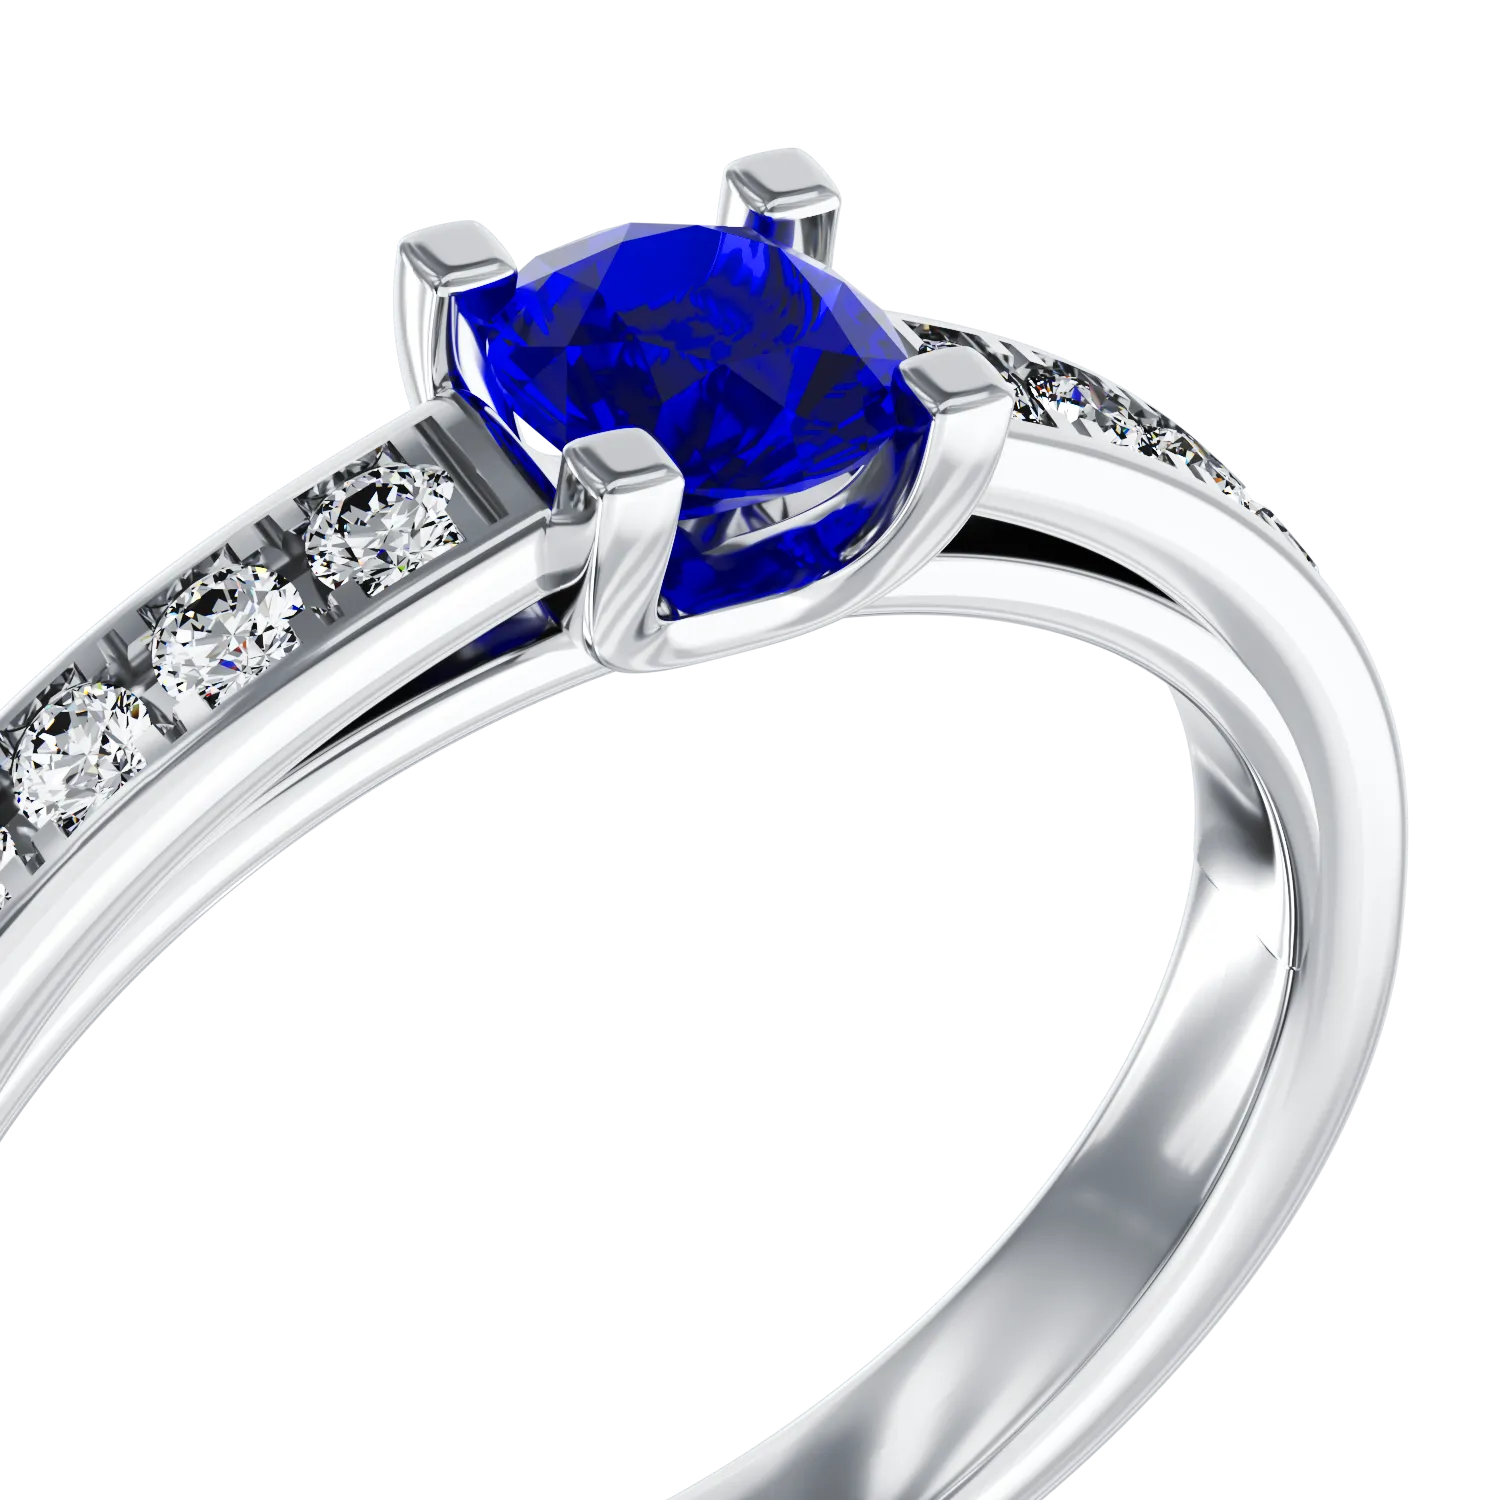 18k white gold engagement ring with 0.299ct sapphire and 0.135ct diamonds